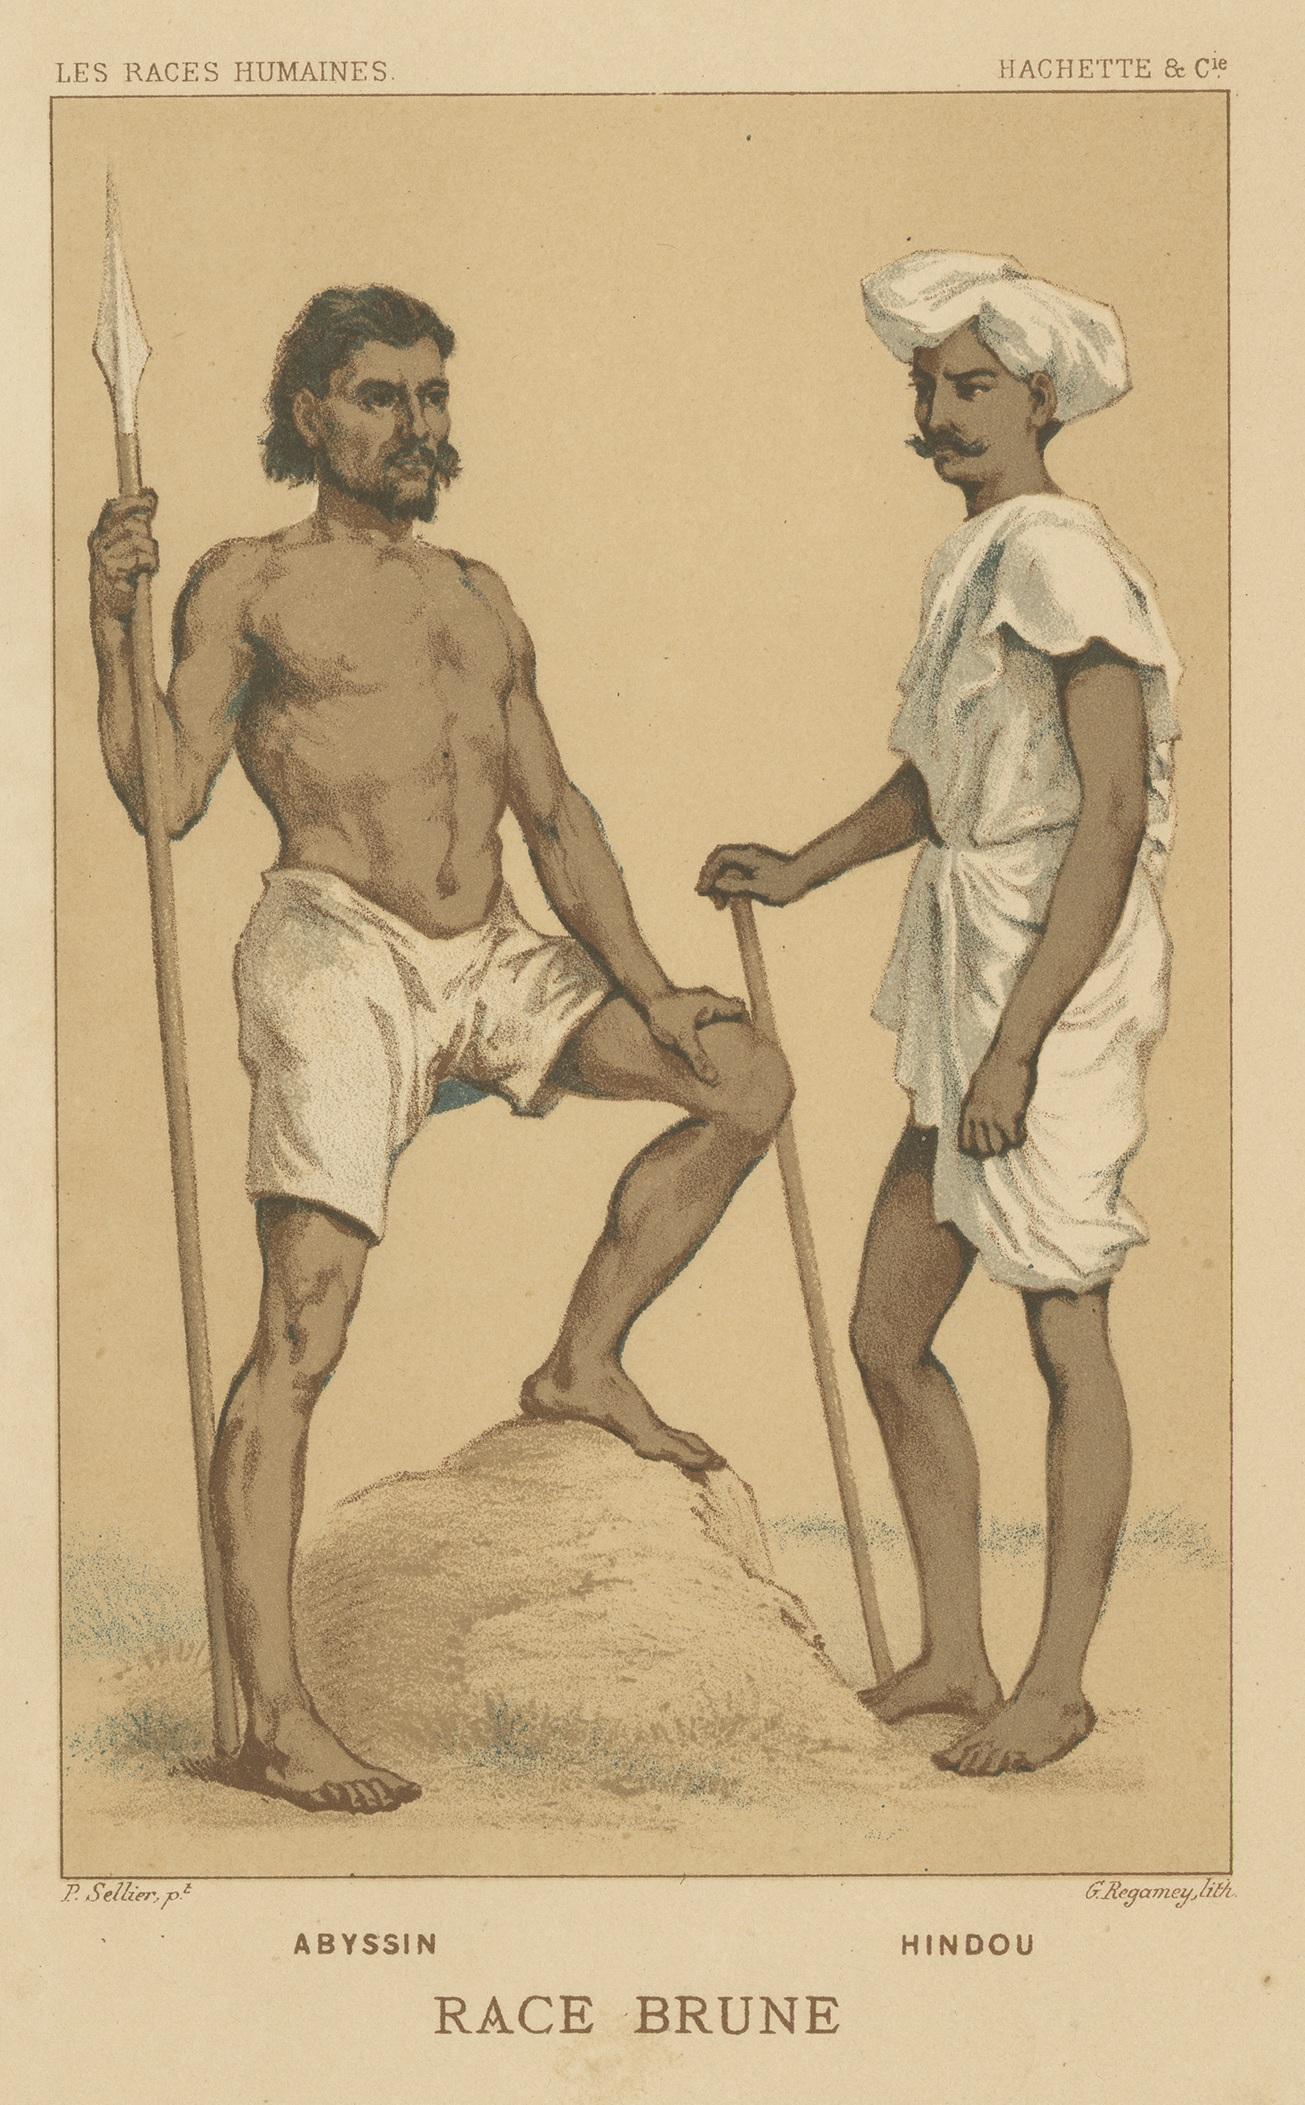 Antique print titled 'Abyssin - Race Brune - Hindou'. Lithograph of a native from Abyssinia and a Hindu. This print originates from 'Les Races Humaines' published by Hachette et Cie.